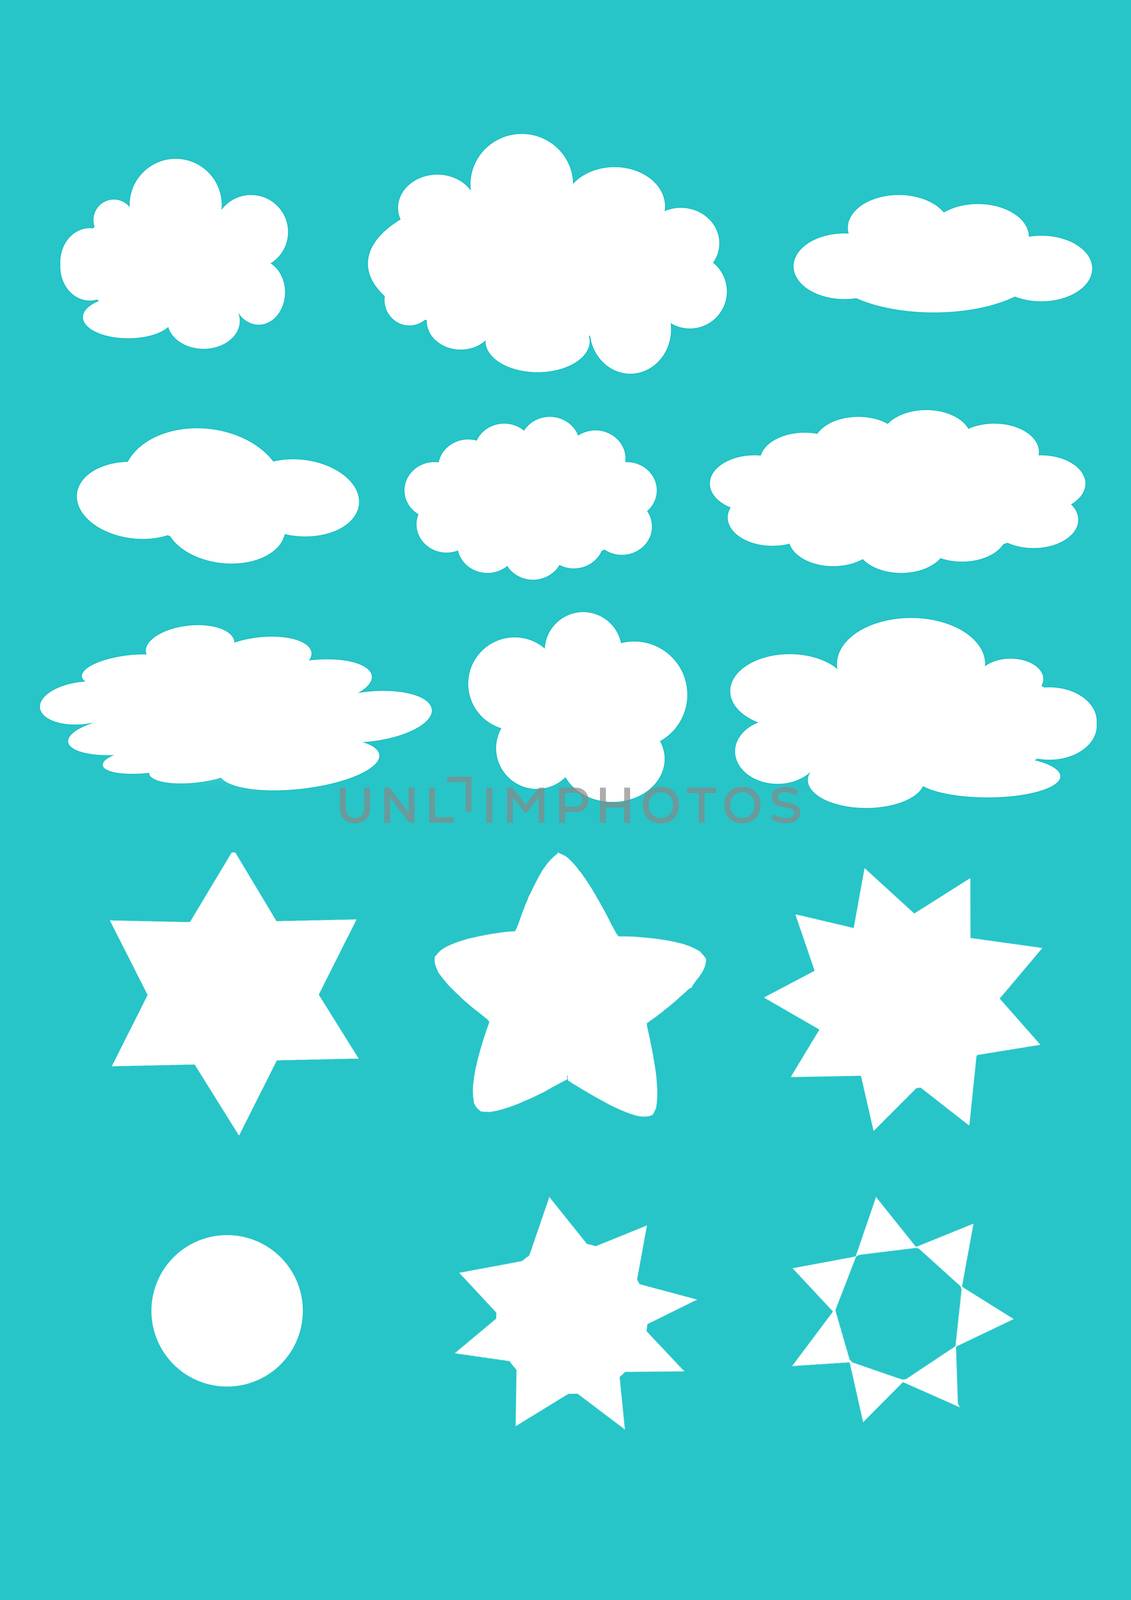 Set of clouds, stars and sun shapes by chandlervid85